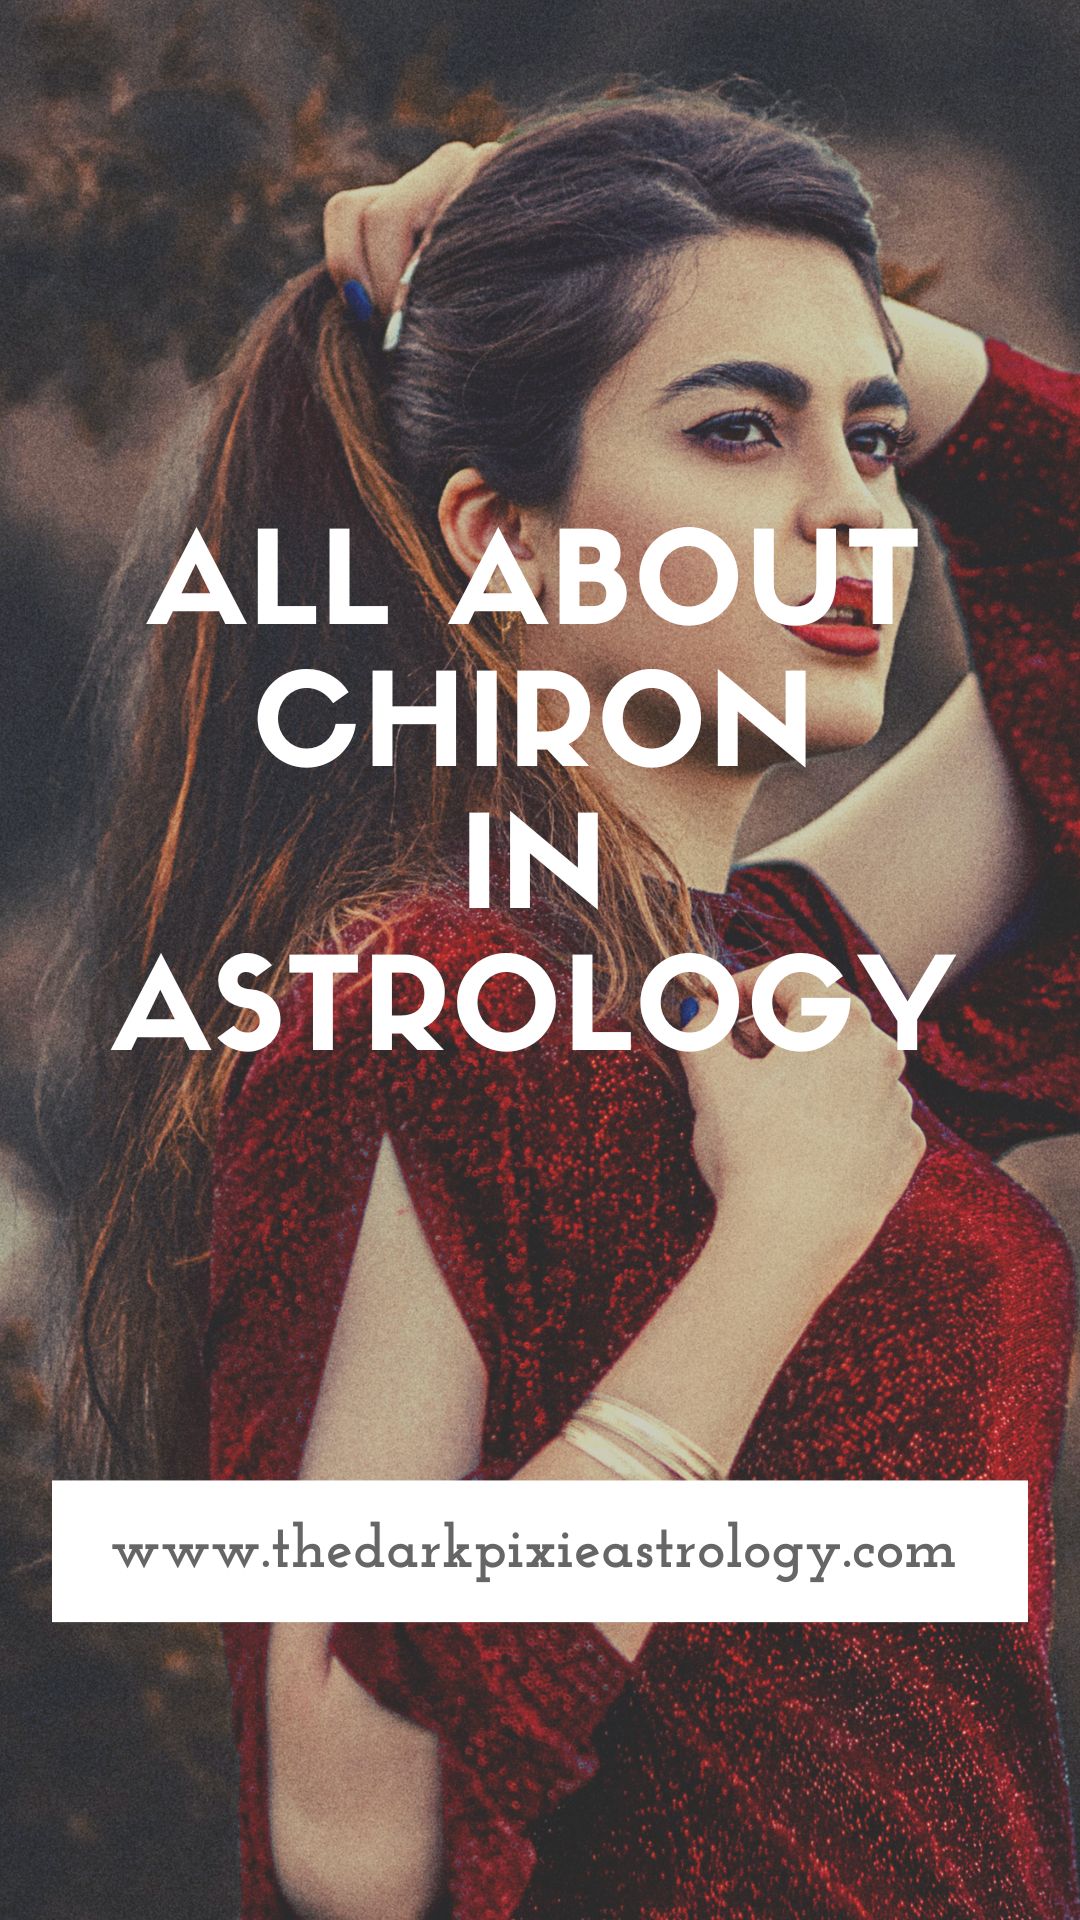 All About Chiron in Astrology - The Dark Pixie Astrology